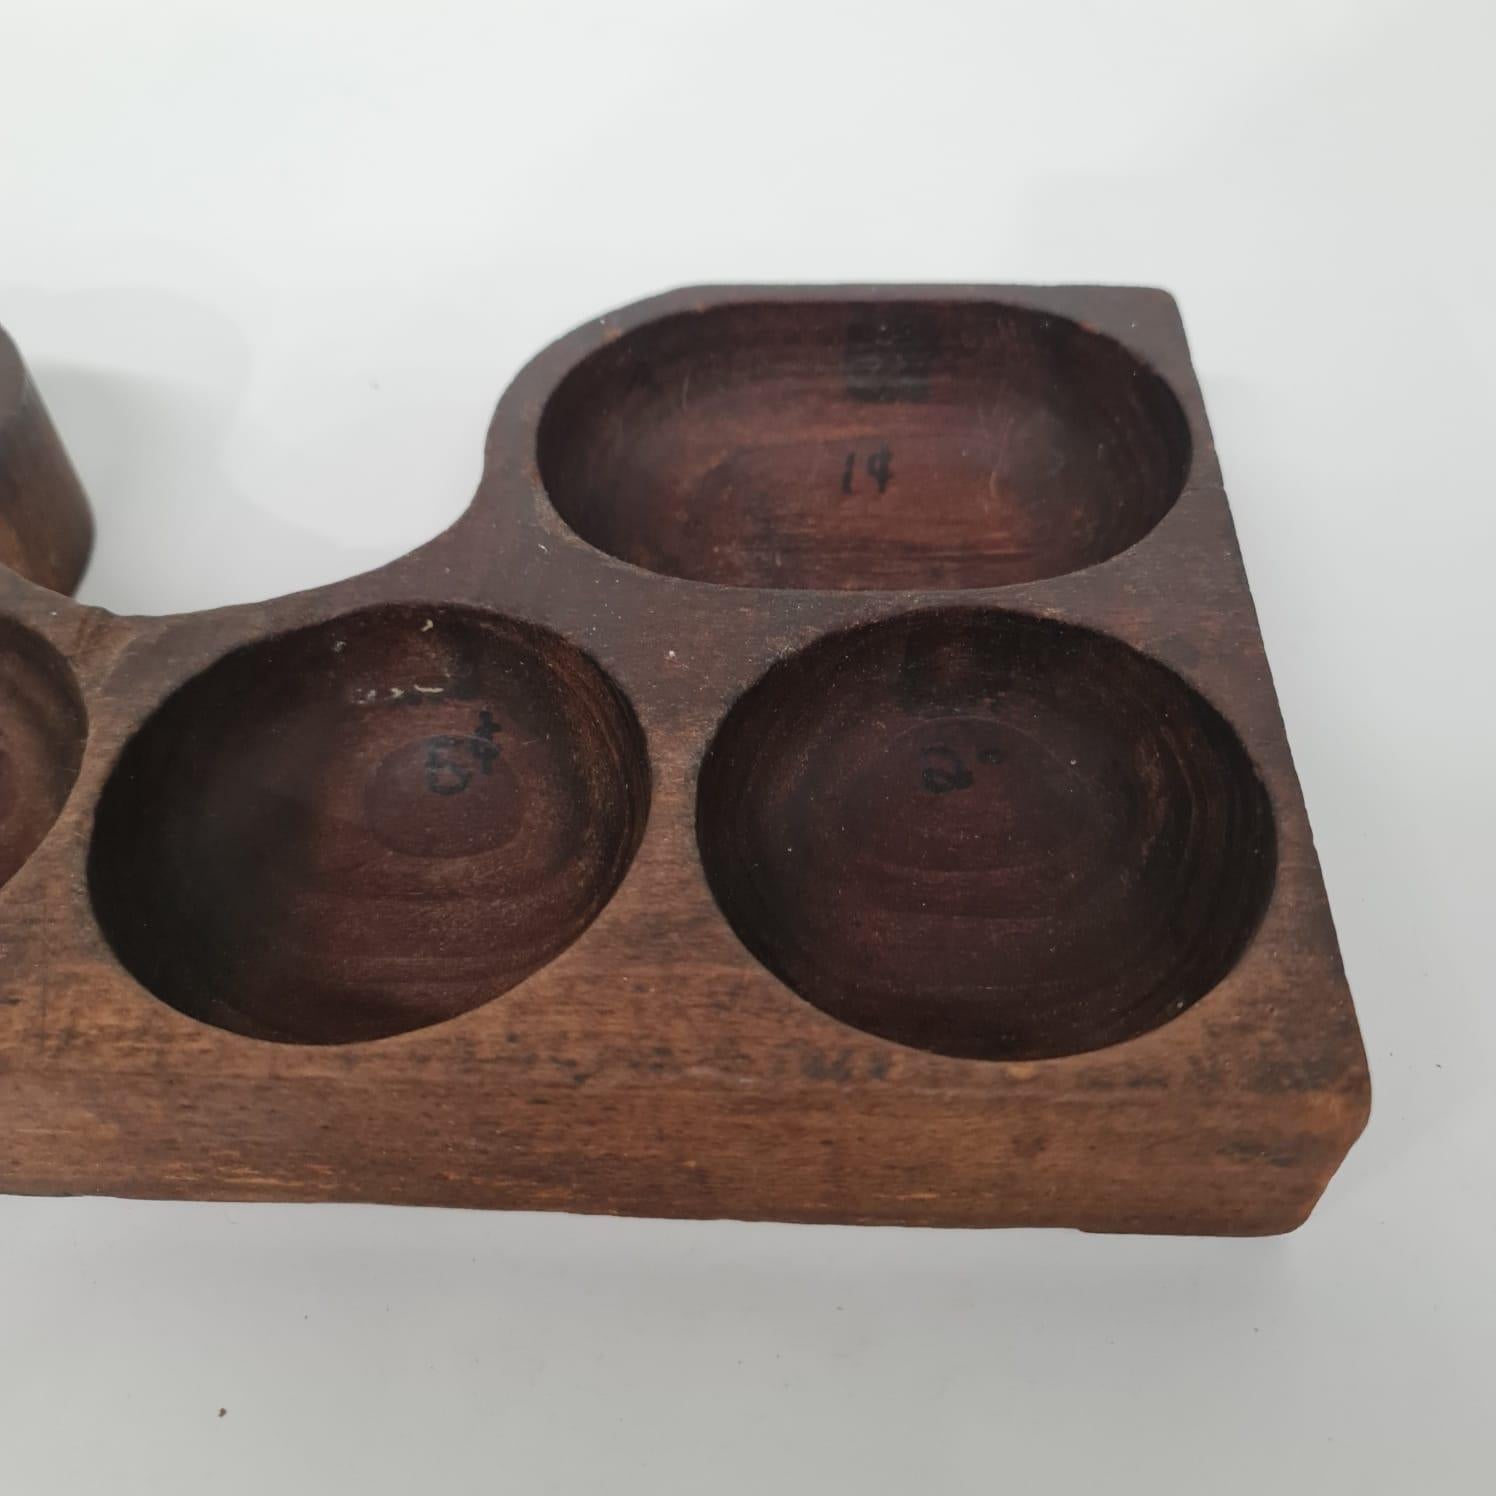 Solid oak desk organiser or key tray. Perfect for organising coins, Keys or as a serving tray. 
Found in a house clearance west of Sydney Australia.